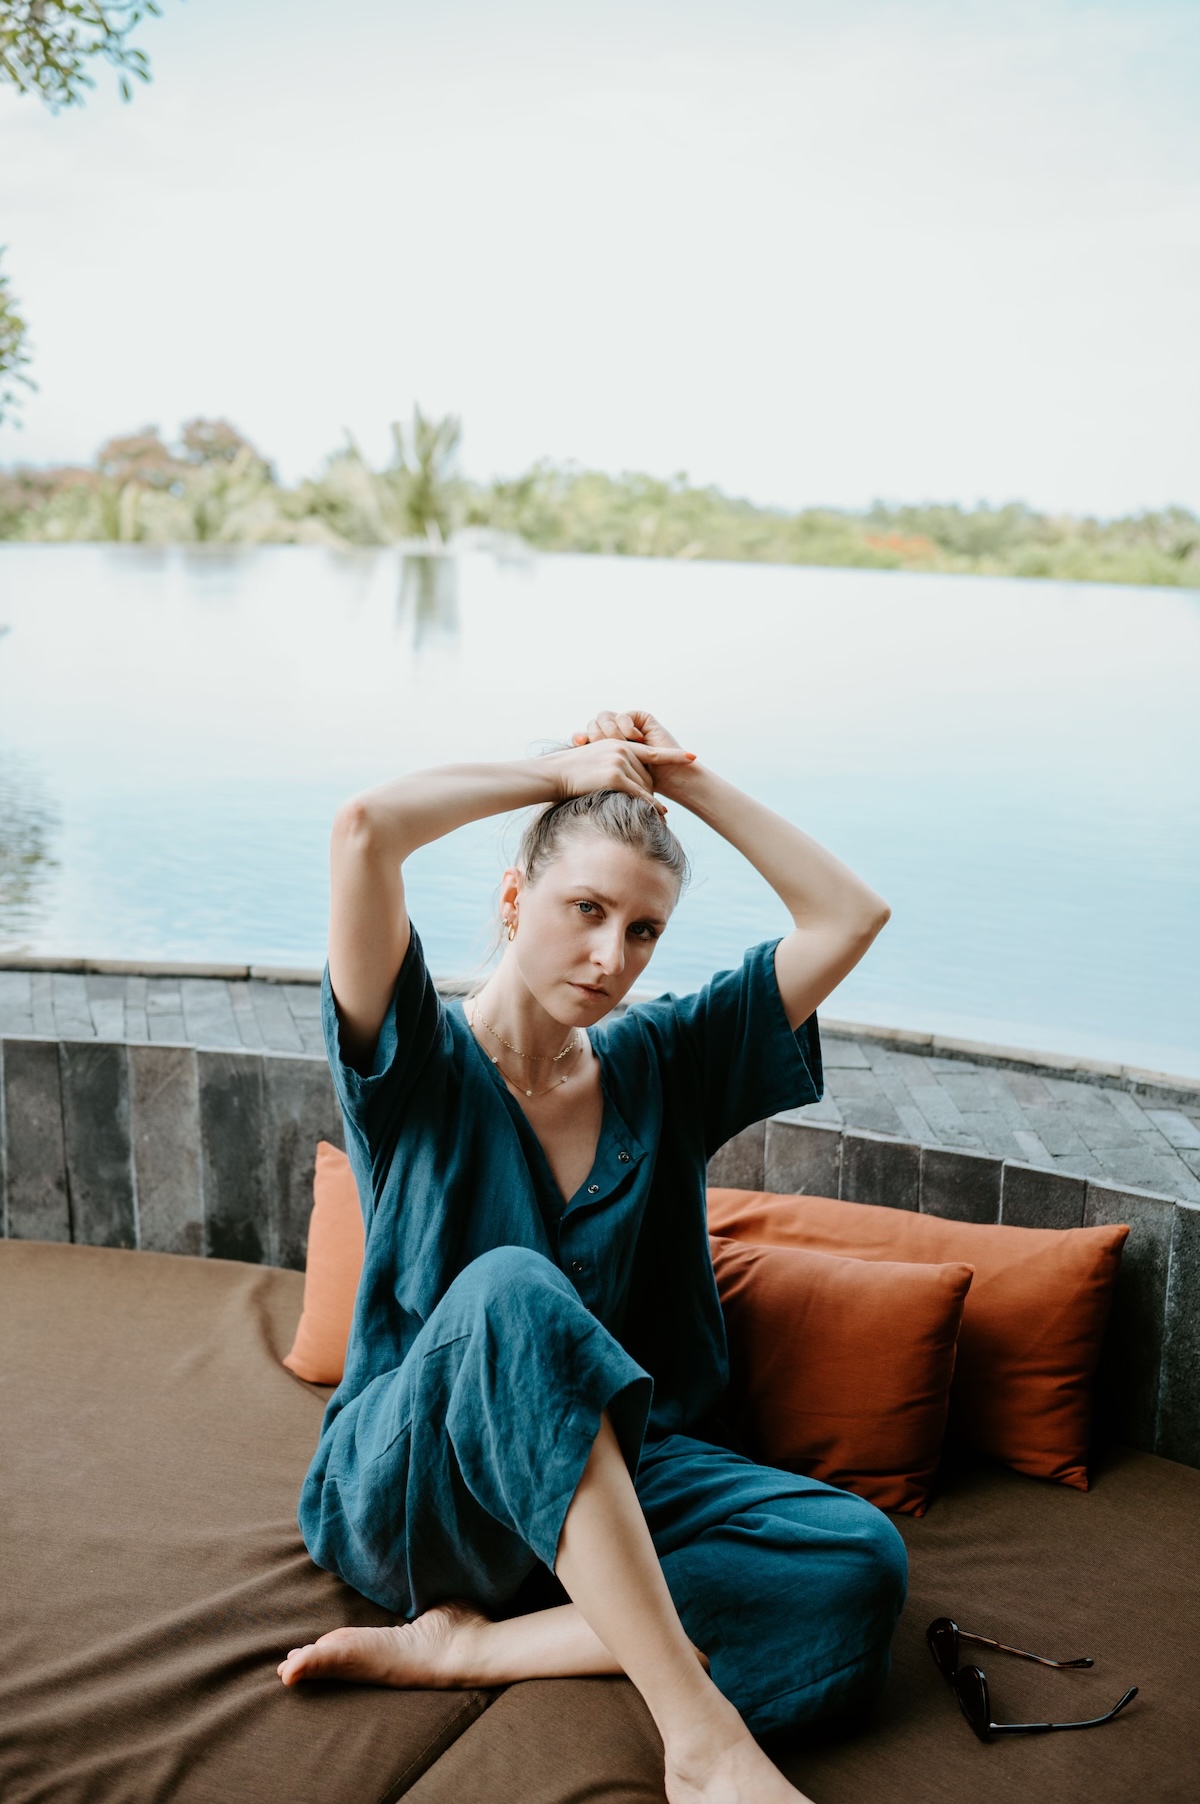 Kendra sitting near a lake, putting her hair up.